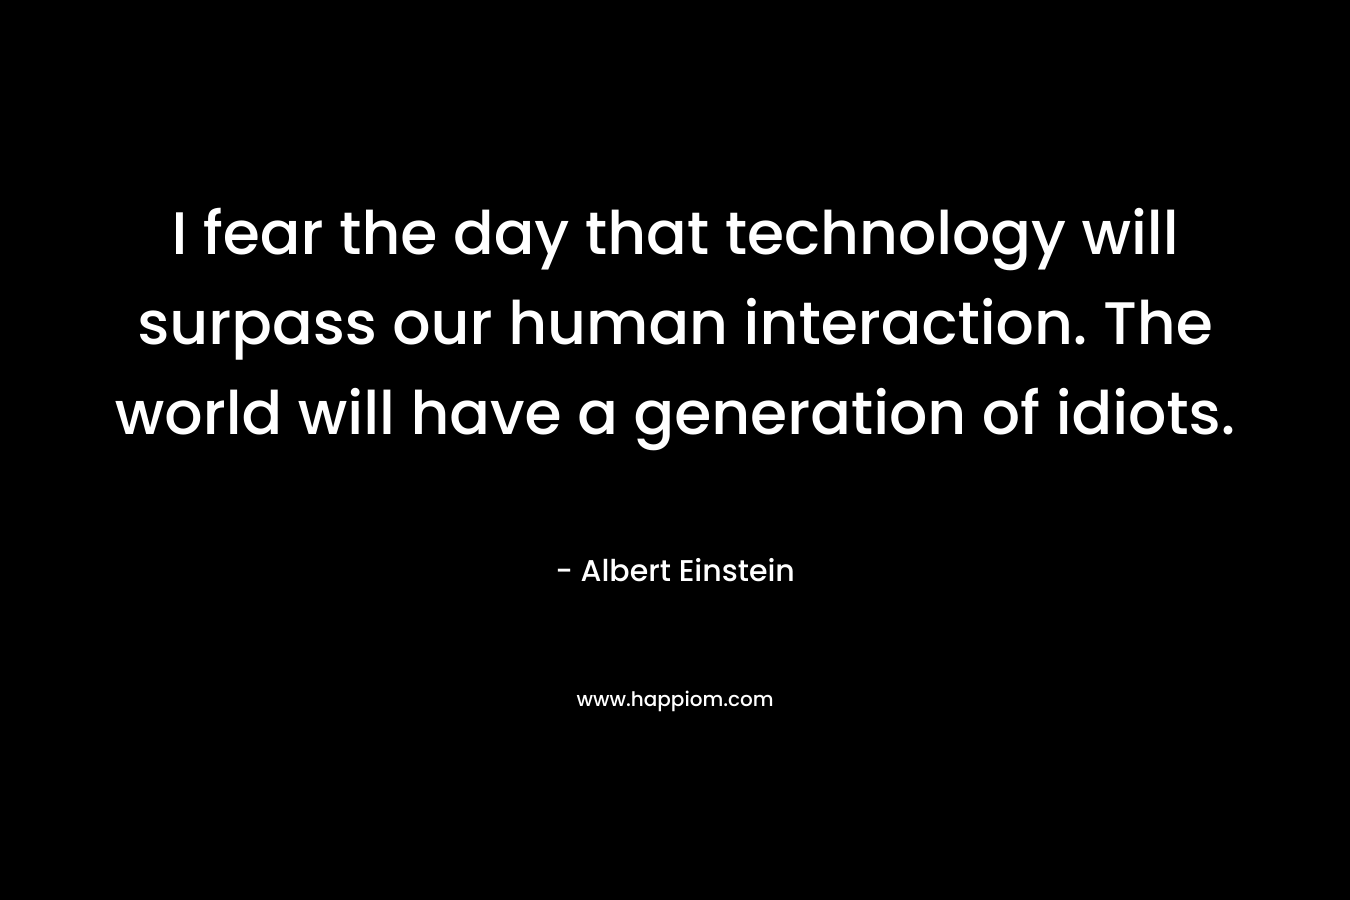 I fear the day that technology will surpass our human interaction. The world will have a generation of idiots. – Albert Einstein